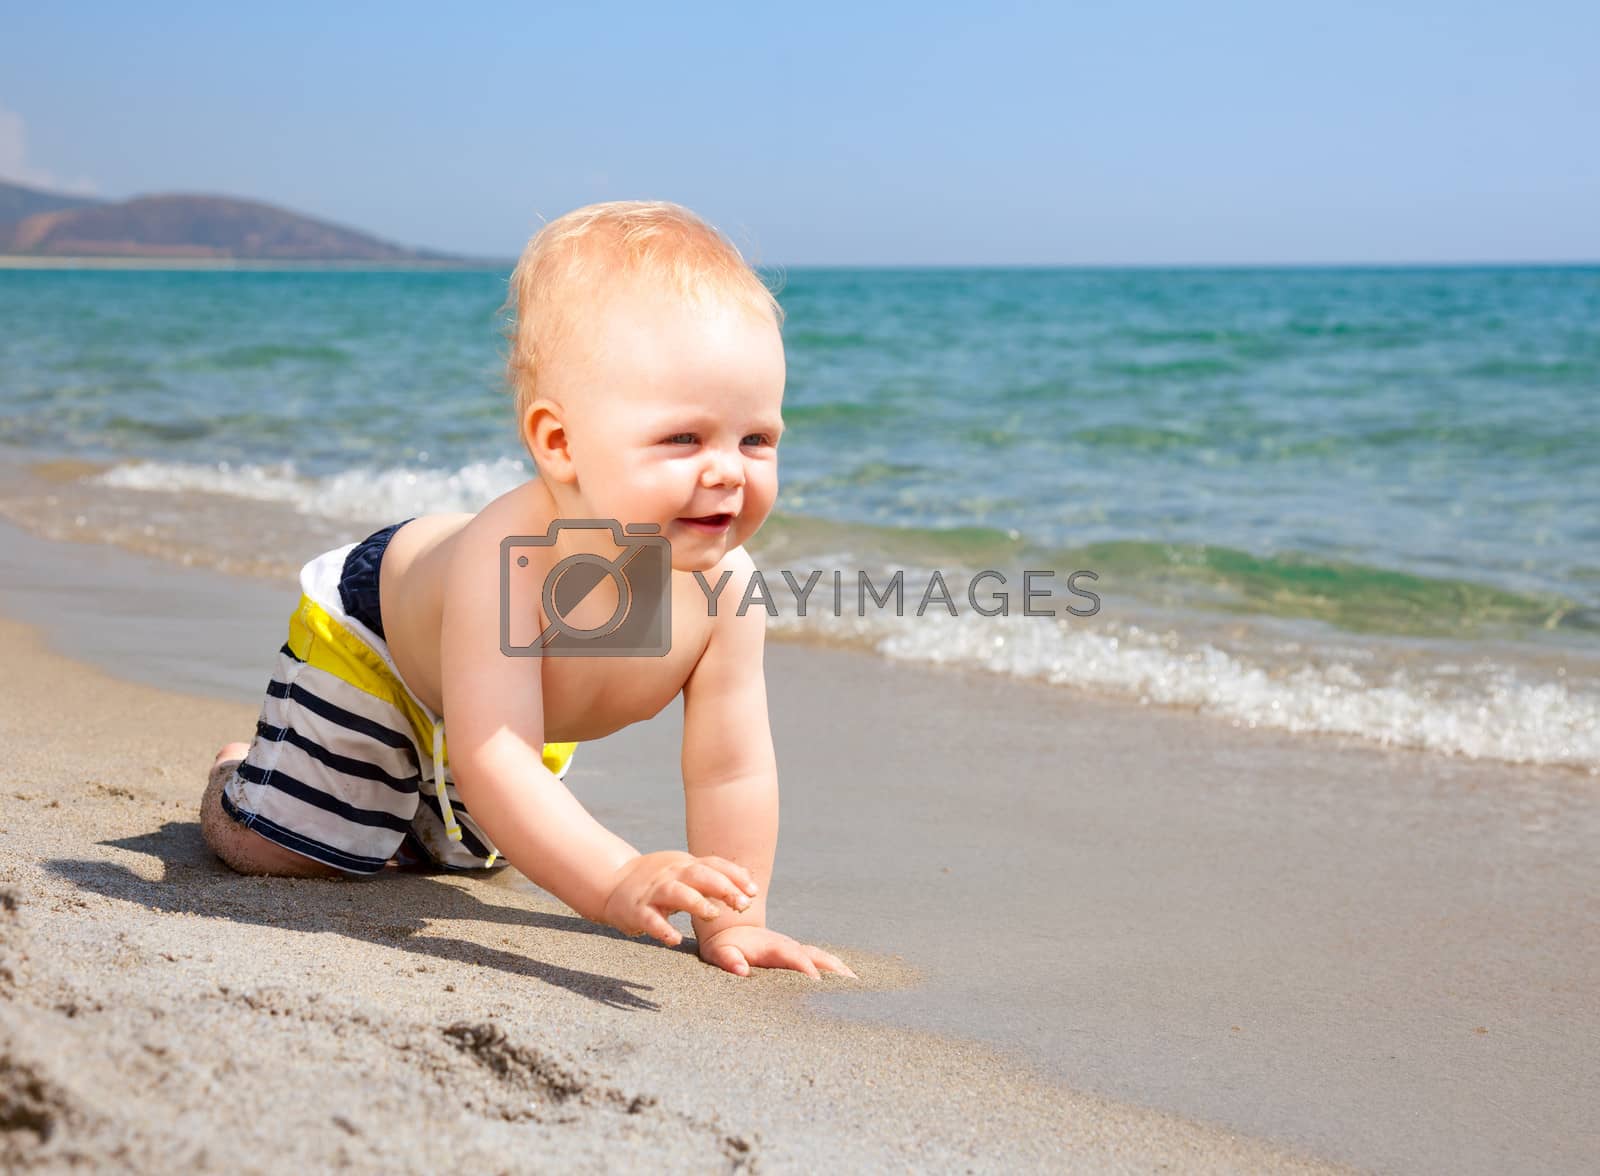 Royalty free image of Infant on a beach by naumoid